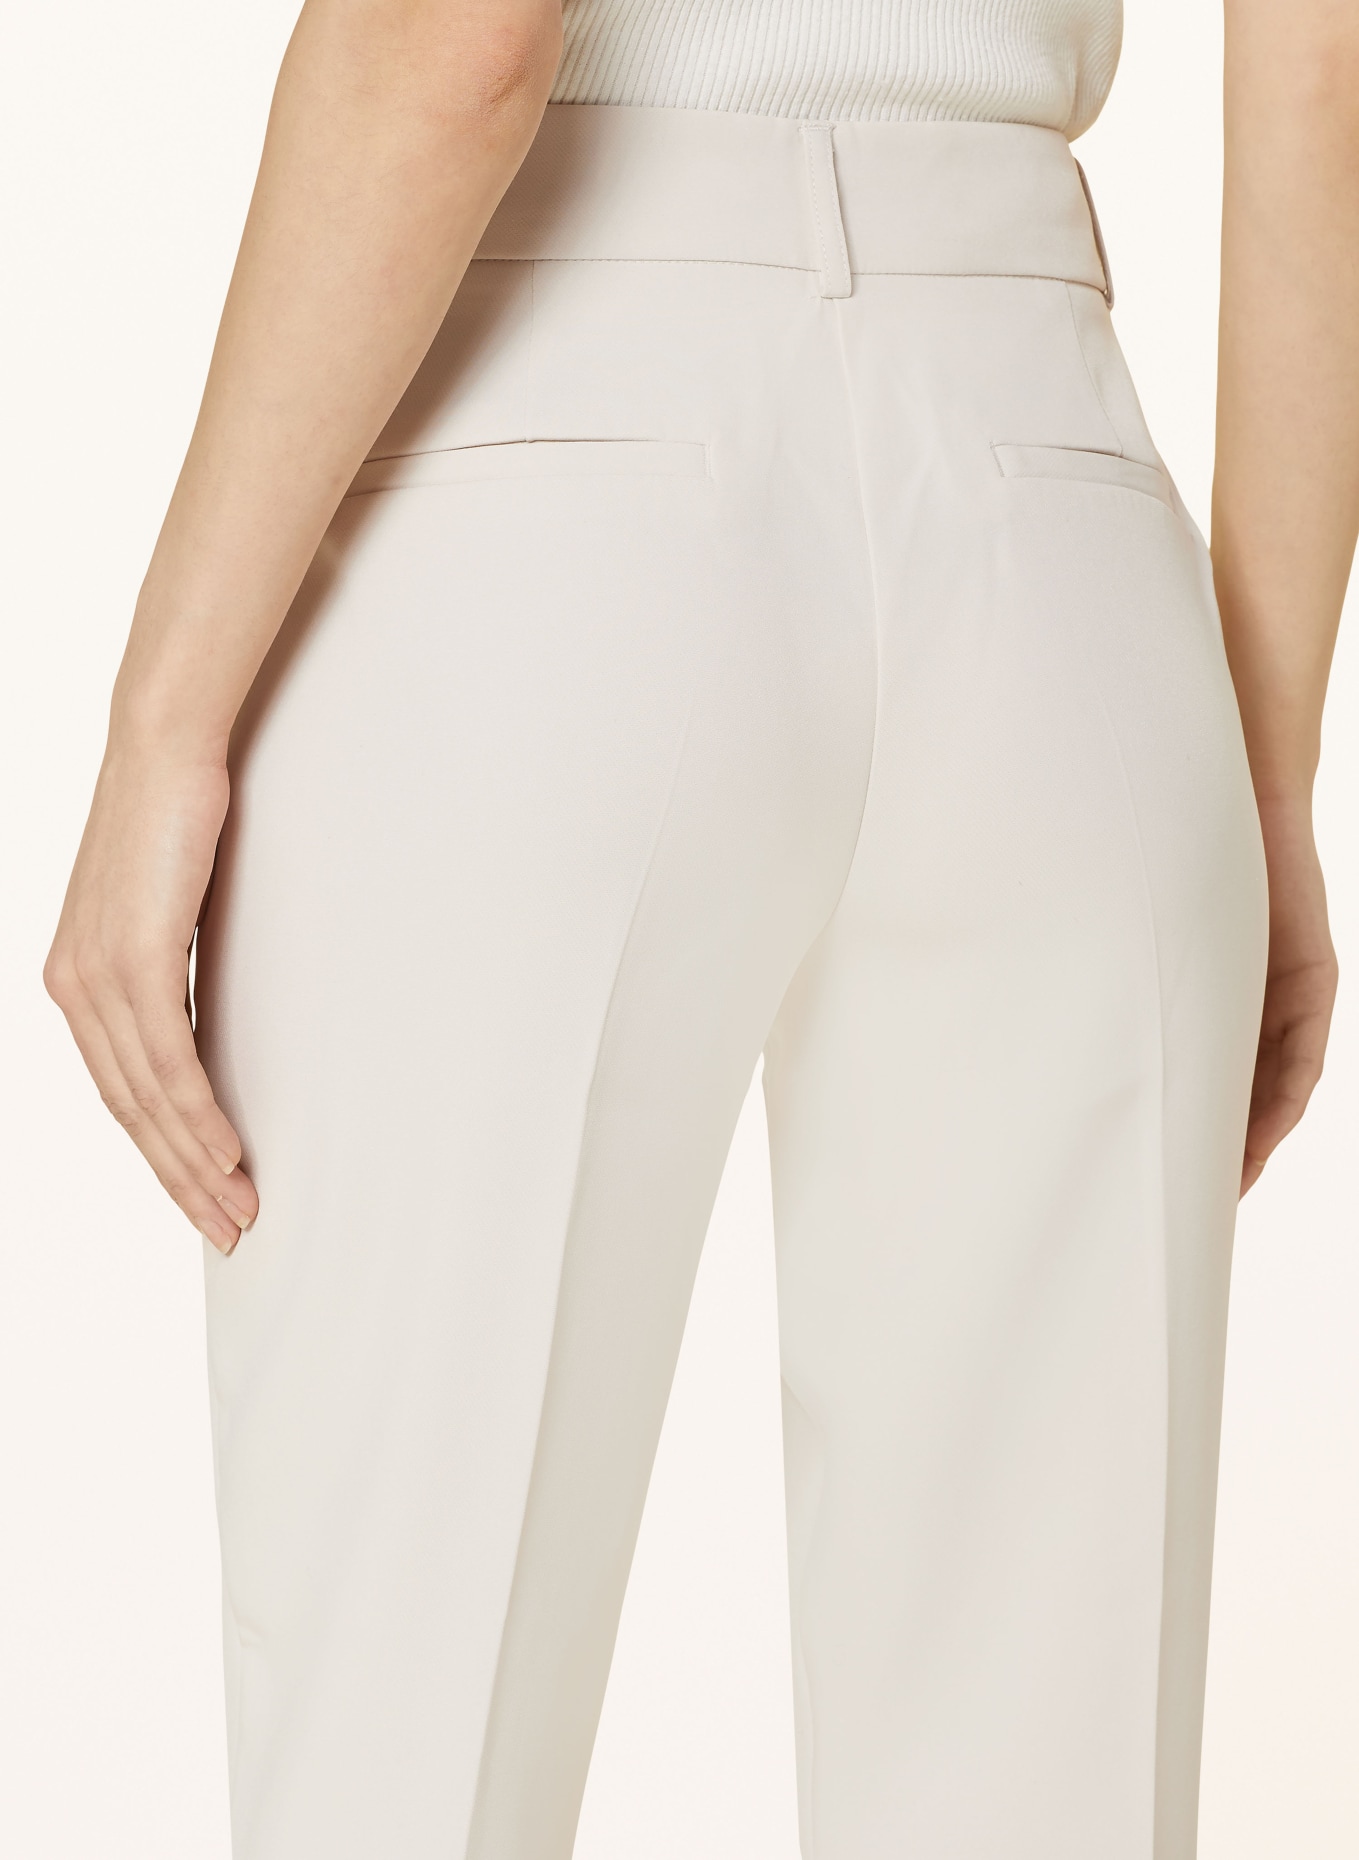 ONLY Trousers, Color: ECRU (Image 5)